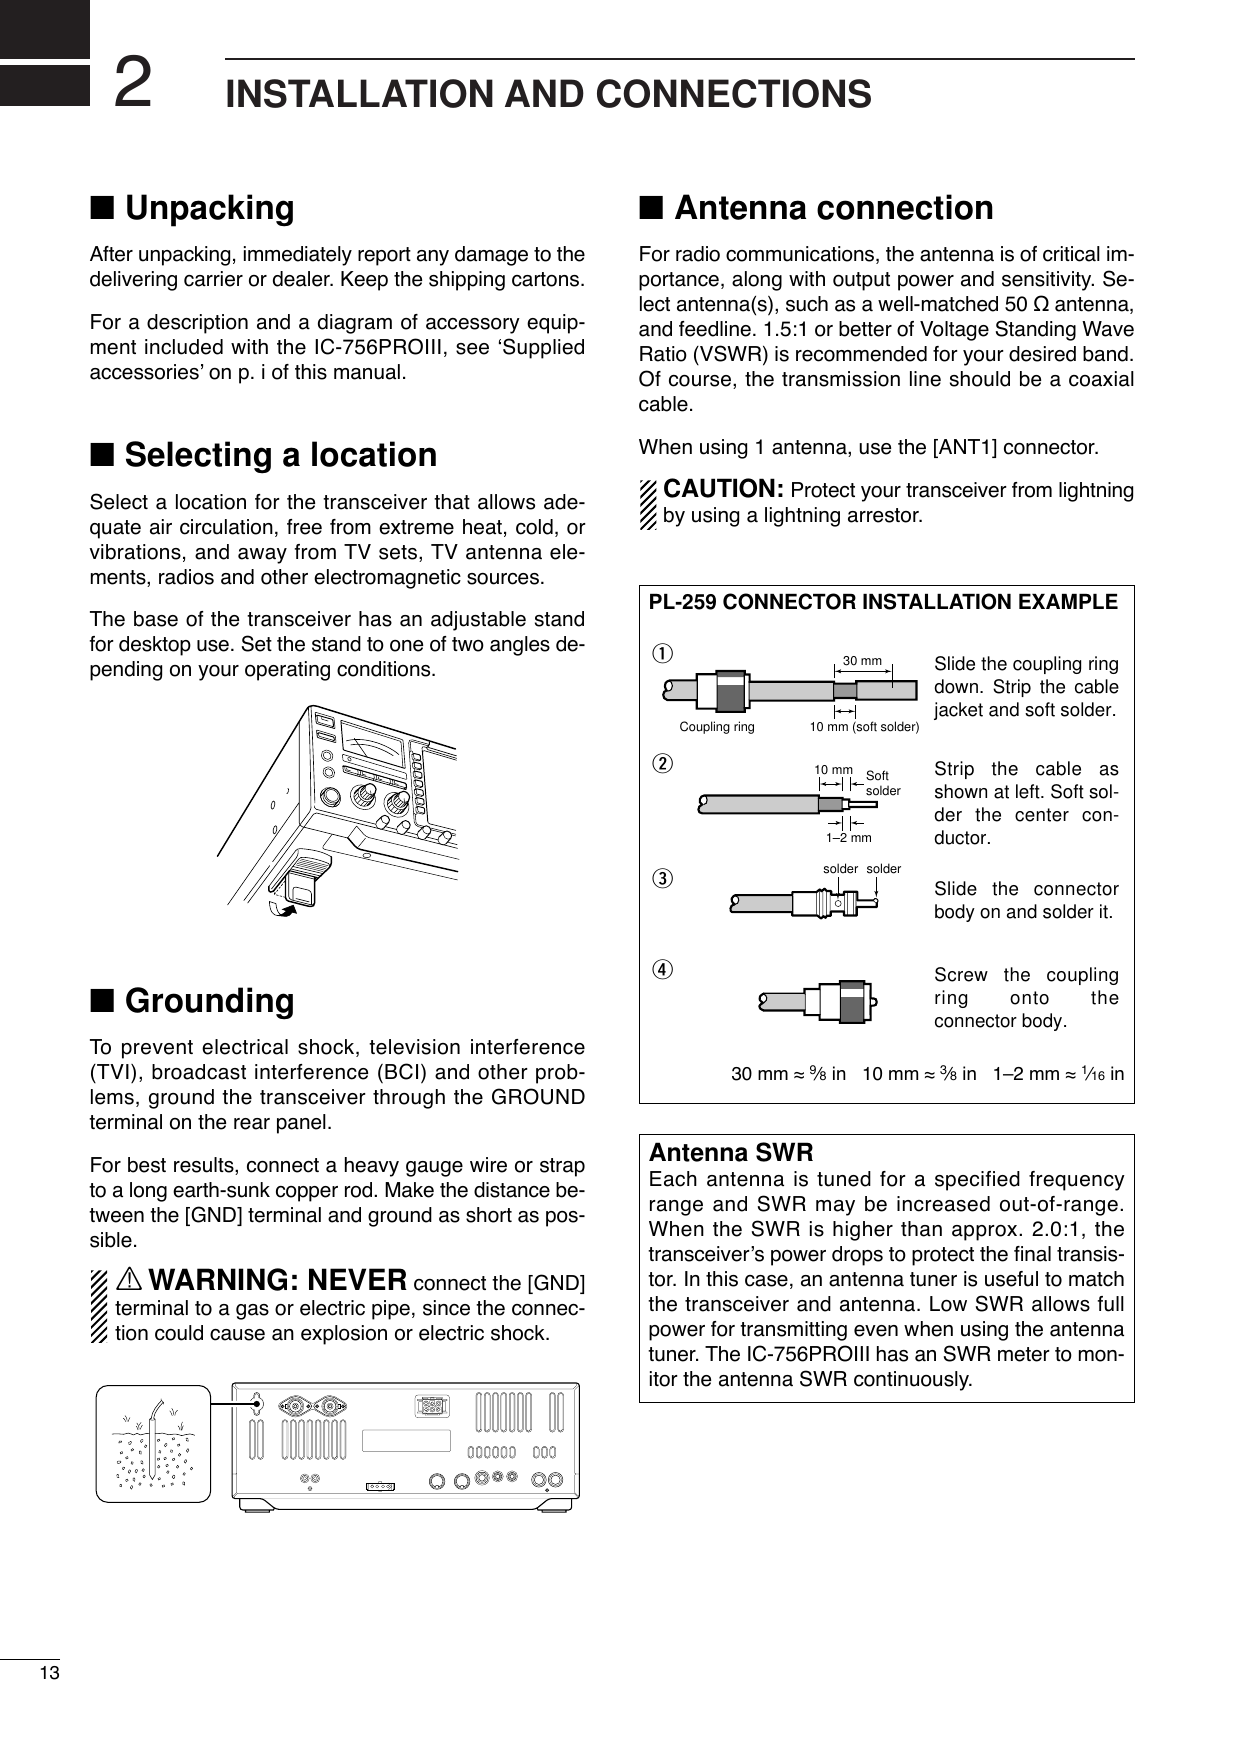 2INSTALLATION AND CONNECTIONS■UnpackingAfter unpacking, immediately report any damage to thedelivering carrier or dealer. Keep the shipping cartons.For a description and a diagram of accessory equip-ment included with the IC-756PROIII, see ‘Suppliedaccessories’ on p. i of this manual.■Selecting a locationSelect a location for the transceiver that allows ade-quate air circulation, free from extreme heat, cold, orvibrations, and away from TV sets, TV antenna ele-ments, radios and other electromagnetic sources.The base of the transceiver has an adjustable standfor desktop use. Set the stand to one of two angles de-pending on your operating conditions.■GroundingTo  prevent electrical shock, television interference(TVI), broadcast interference (BCI) and other prob-lems, ground the transceiver through the GROUNDterminal on the rear panel.For best results, connect a heavy gauge wire or strapto a long earth-sunk copper rod. Make the distance be-tween the [GND] terminal and ground as short as pos-sible.RWARNING: NEVER connect the [GND]terminal to a gas or electric pipe, since the connec-tion could cause an explosion or electric shock.■Antenna connectionFor radio communications, the antenna is of critical im-portance, along with output power and sensitivity. Se-lect antenna(s), such as a well-matched 50 Ωantenna,and feedline. 1.5:1 or better of Voltage Standing WaveRatio (VSWR) is recommended for your desired band.Of course, the transmission line should be a coaxialcable.When using 1 antenna, use the [ANT1] connector.CAUTION: Protect your transceiver from lightningby using a lightning arrestor.Antenna SWREach antenna is tuned for a specified frequencyrange and SWR may be increased out-of-range.When the SWR is higher than approx. 2.0:1, thetransceiver’s power drops to protect the ﬁnal transis-tor. In this case, an antenna tuner is useful to matchthe transceiver and antenna. Low SWR allows fullpower for transmitting even when using the antennatuner. The IC-756PROIII has an SWR meter to mon-itor the antenna SWR continuously.PL-259 CONNECTOR INSTALLATION EXAMPLE30 mm ≈9⁄8in   10 mm ≈3⁄8in   1–2 mm ≈1⁄16 in30 mm10 mm (soft solder)10 mm1–2 mmsolder solderSoftsolderCoupling ringSlide the coupling ring down. Strip the cable jacket and soft solder.Slide the connector body on and solder it.Screw the coupling ring onto the connector body.Strip the cable as shown at left. Soft sol-der the center con-ductor.qwer13